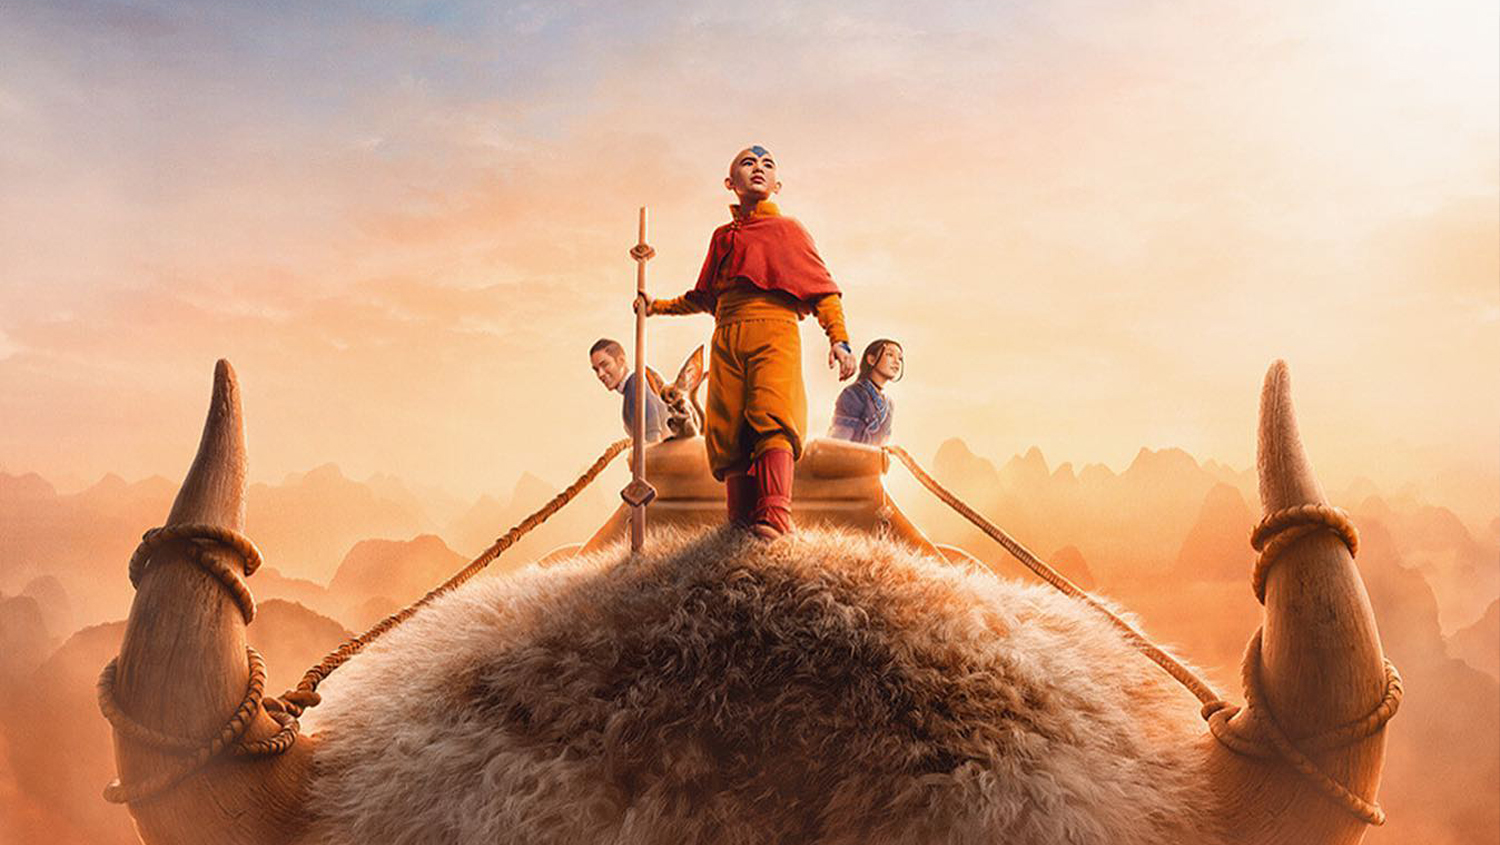 bill horner recommends avatar the last airbender photos pic